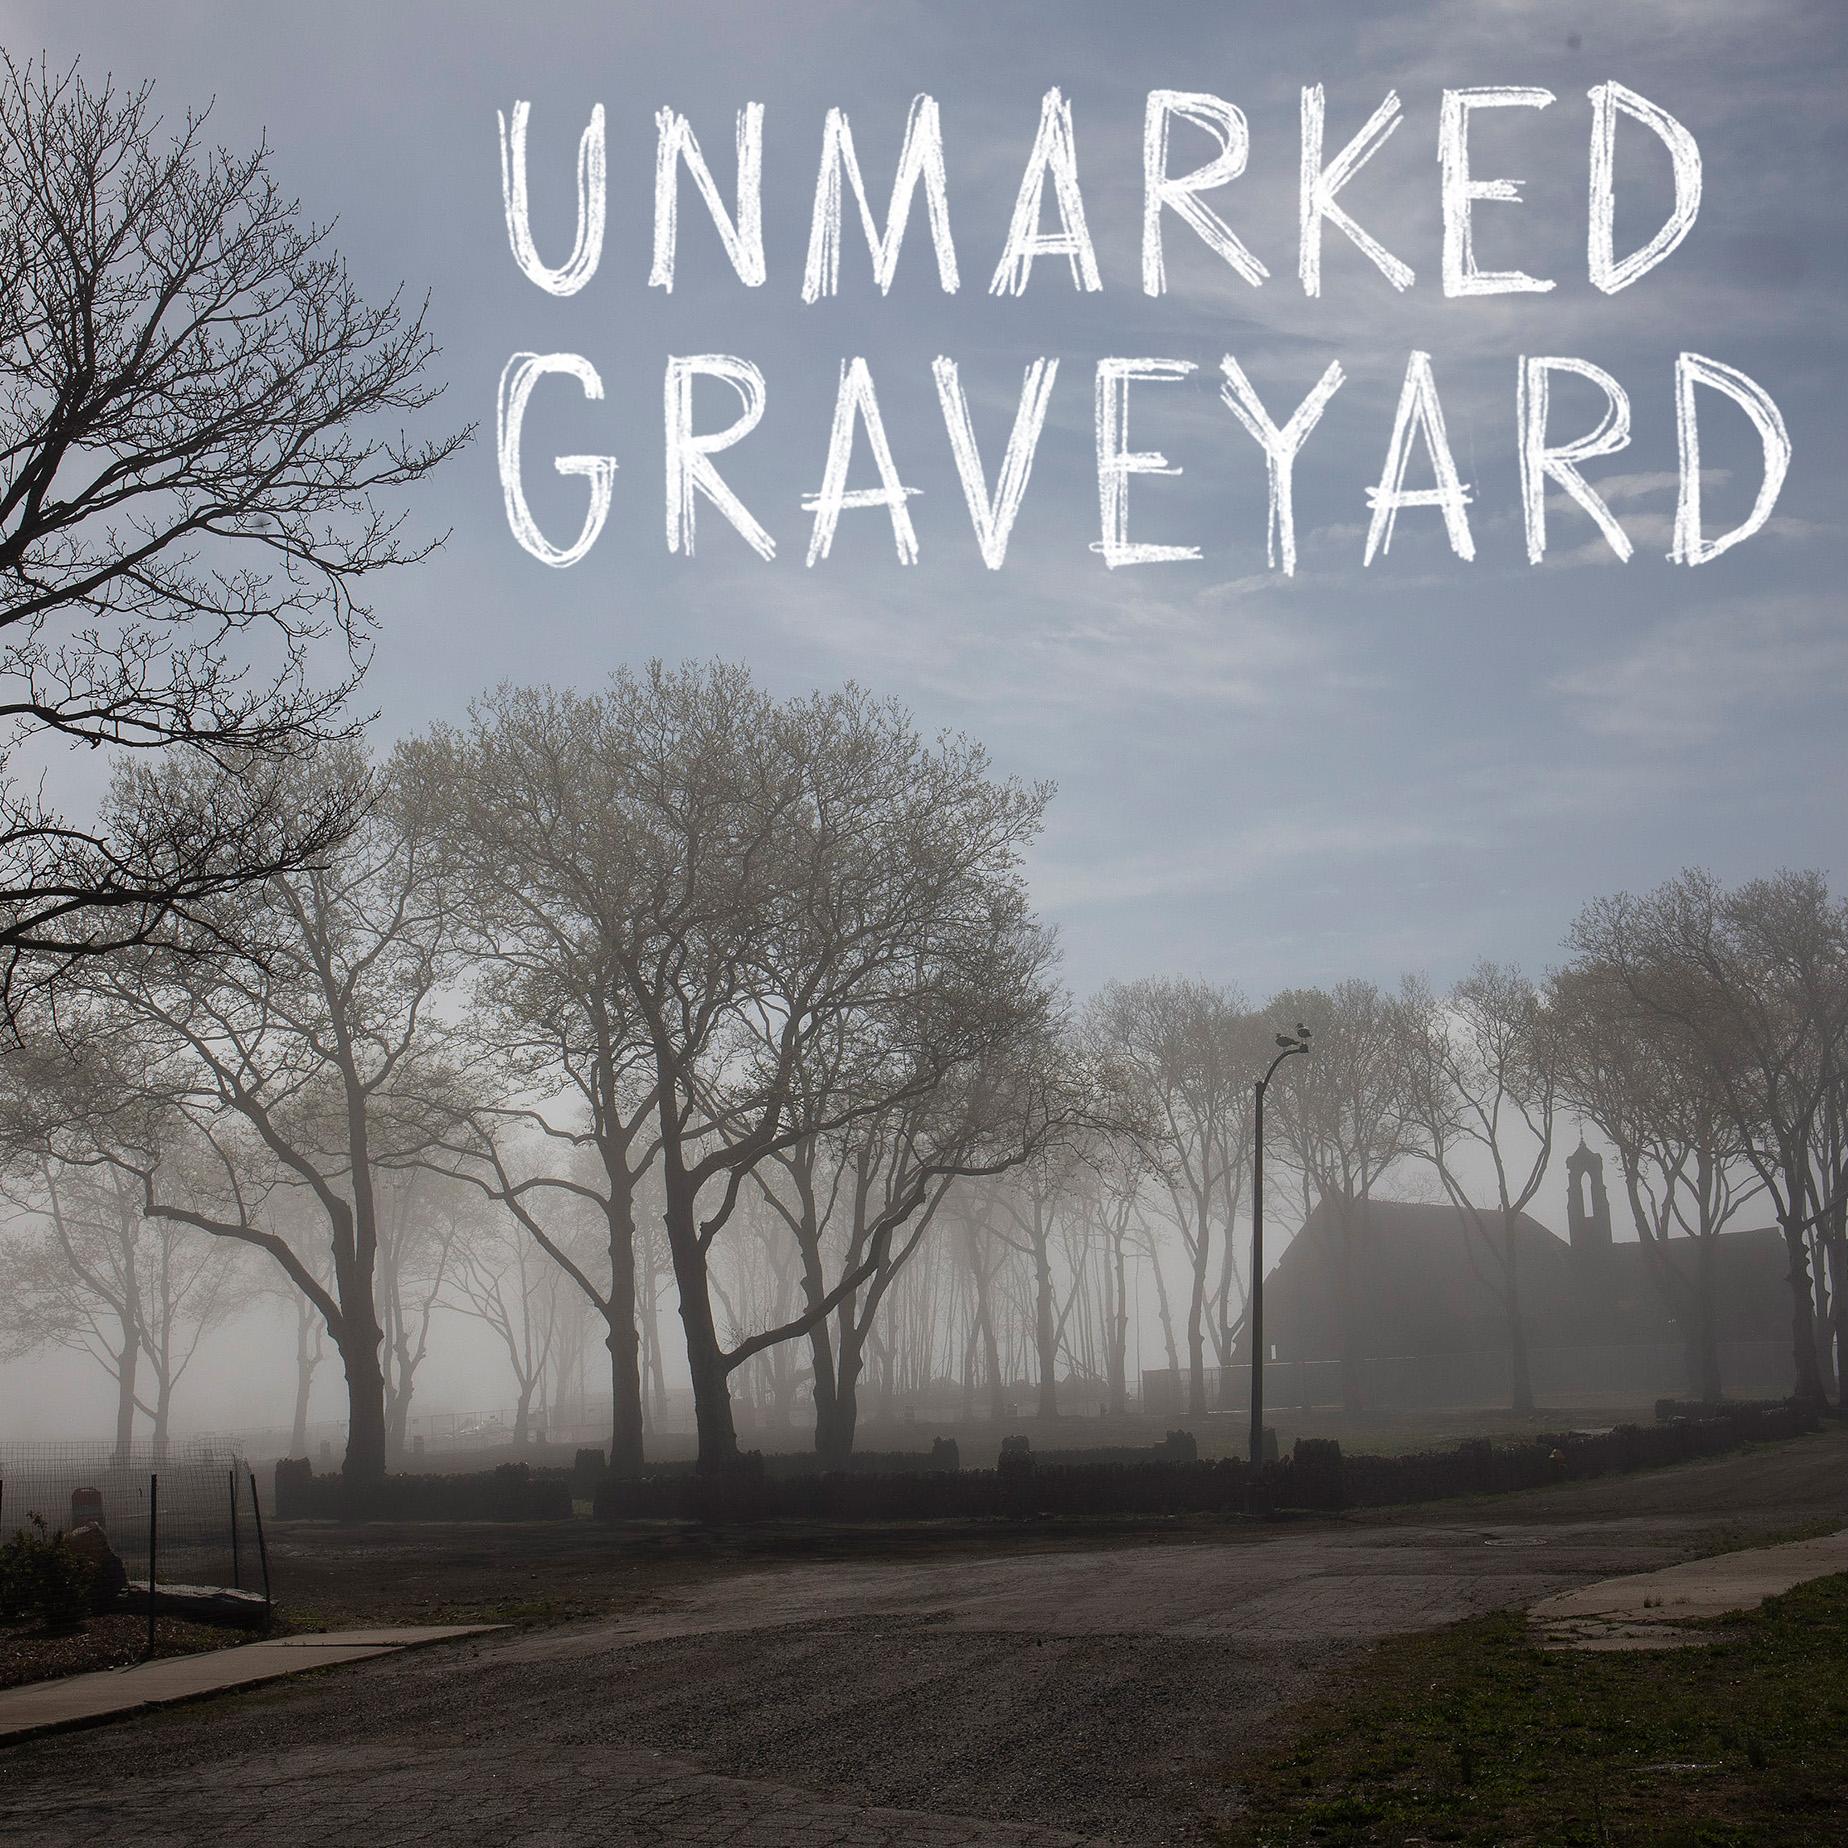 Thumbnail for "The Unmarked Graveyard: Documenting an Invisible Island".